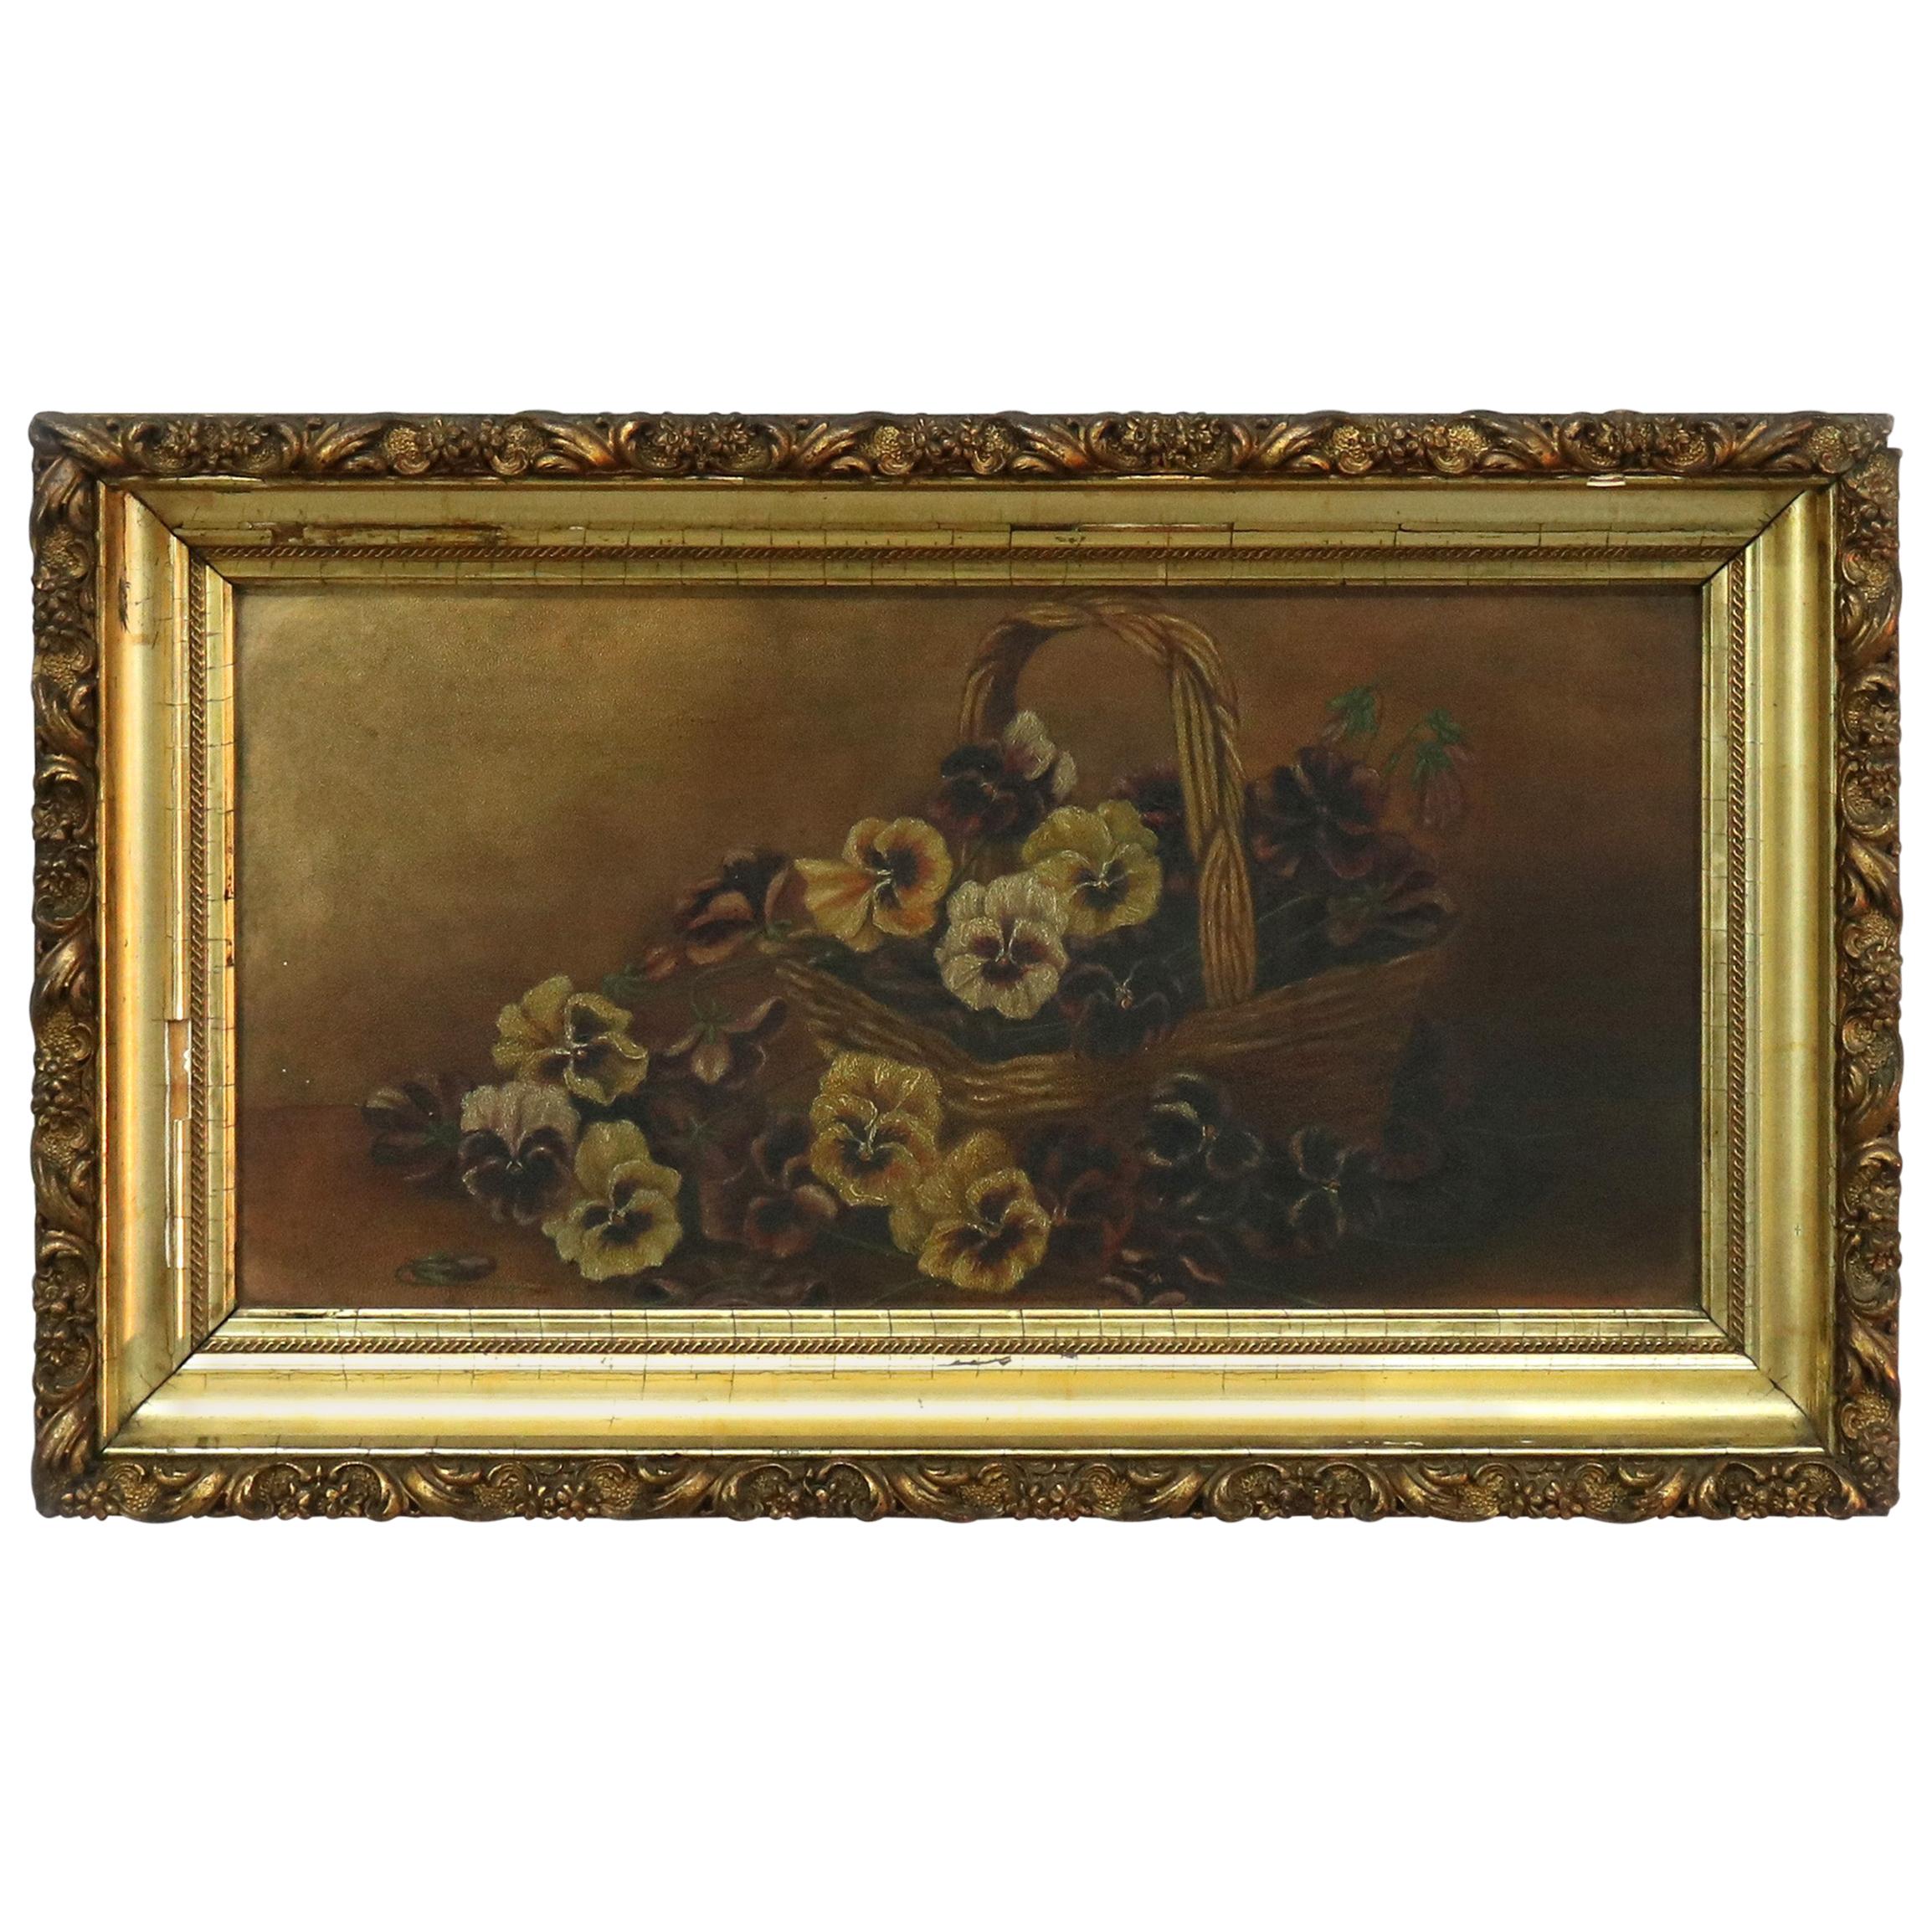 Antique Floral Still Life Oil Painting on Board of Pansies in a Basket, c1890